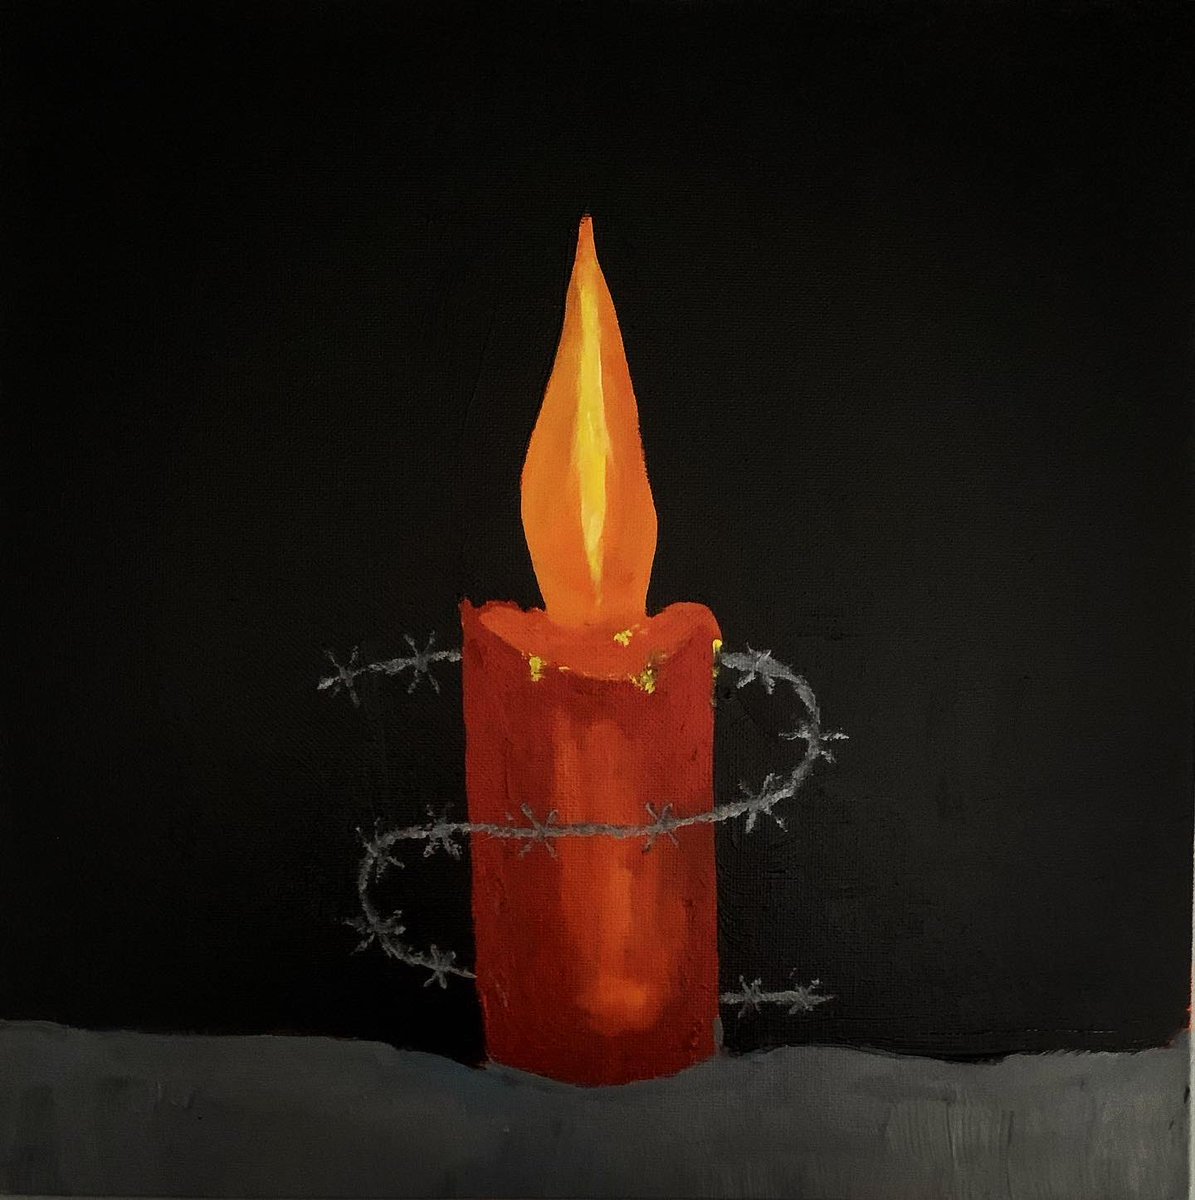 The Amnesty Candle. Oil painting on 12x12 canvas.  #bettertolightacandleofhope #write4rights #writeforrights #HumanRights @aisaskfws @AmnestyNow @amnesty amnesty.ca/writeathon/